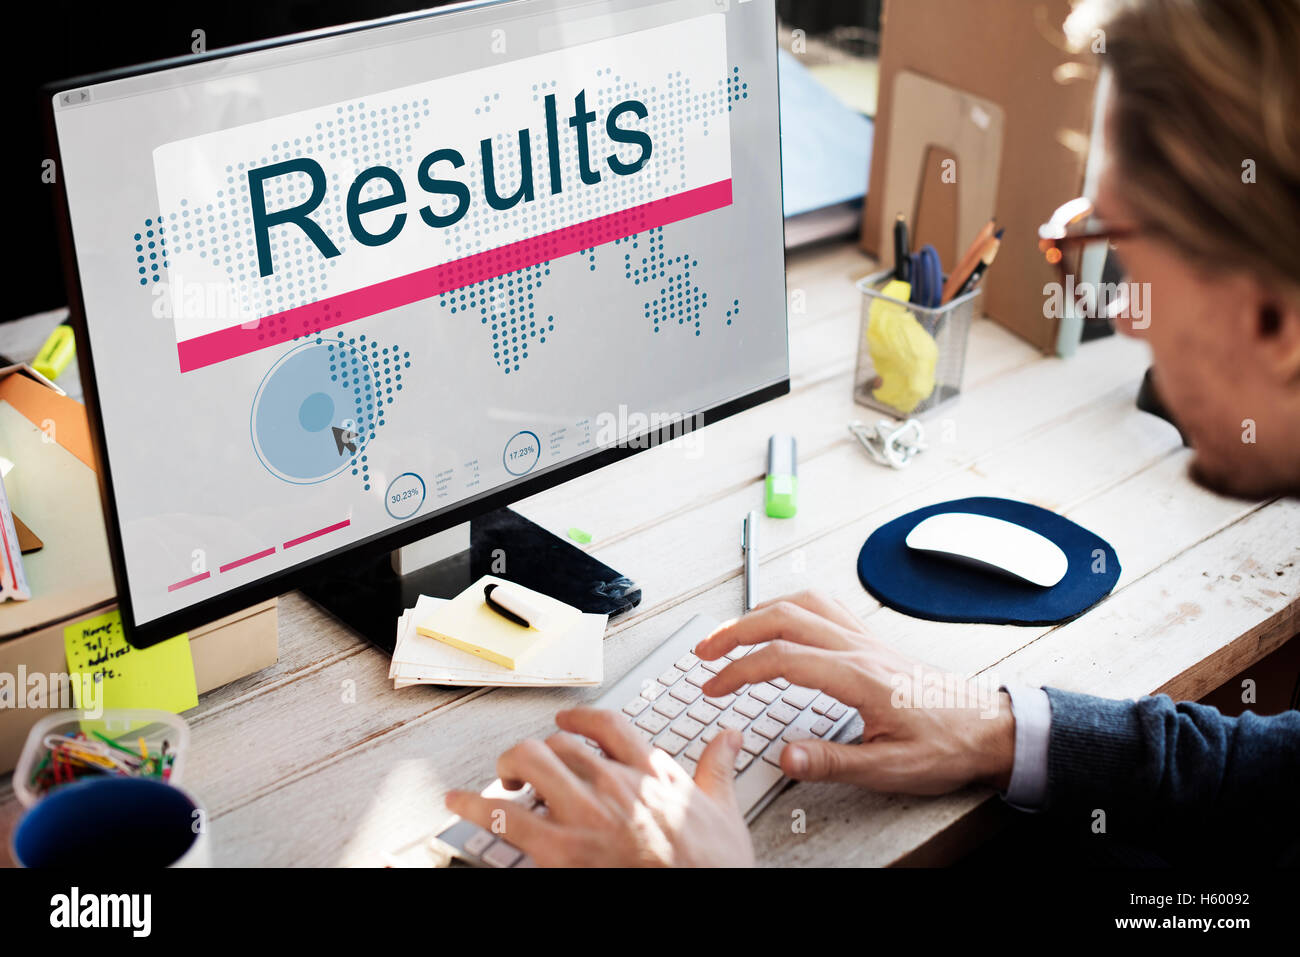 Results Effciency Evaluate Outcome Progress Concept Stock Photo